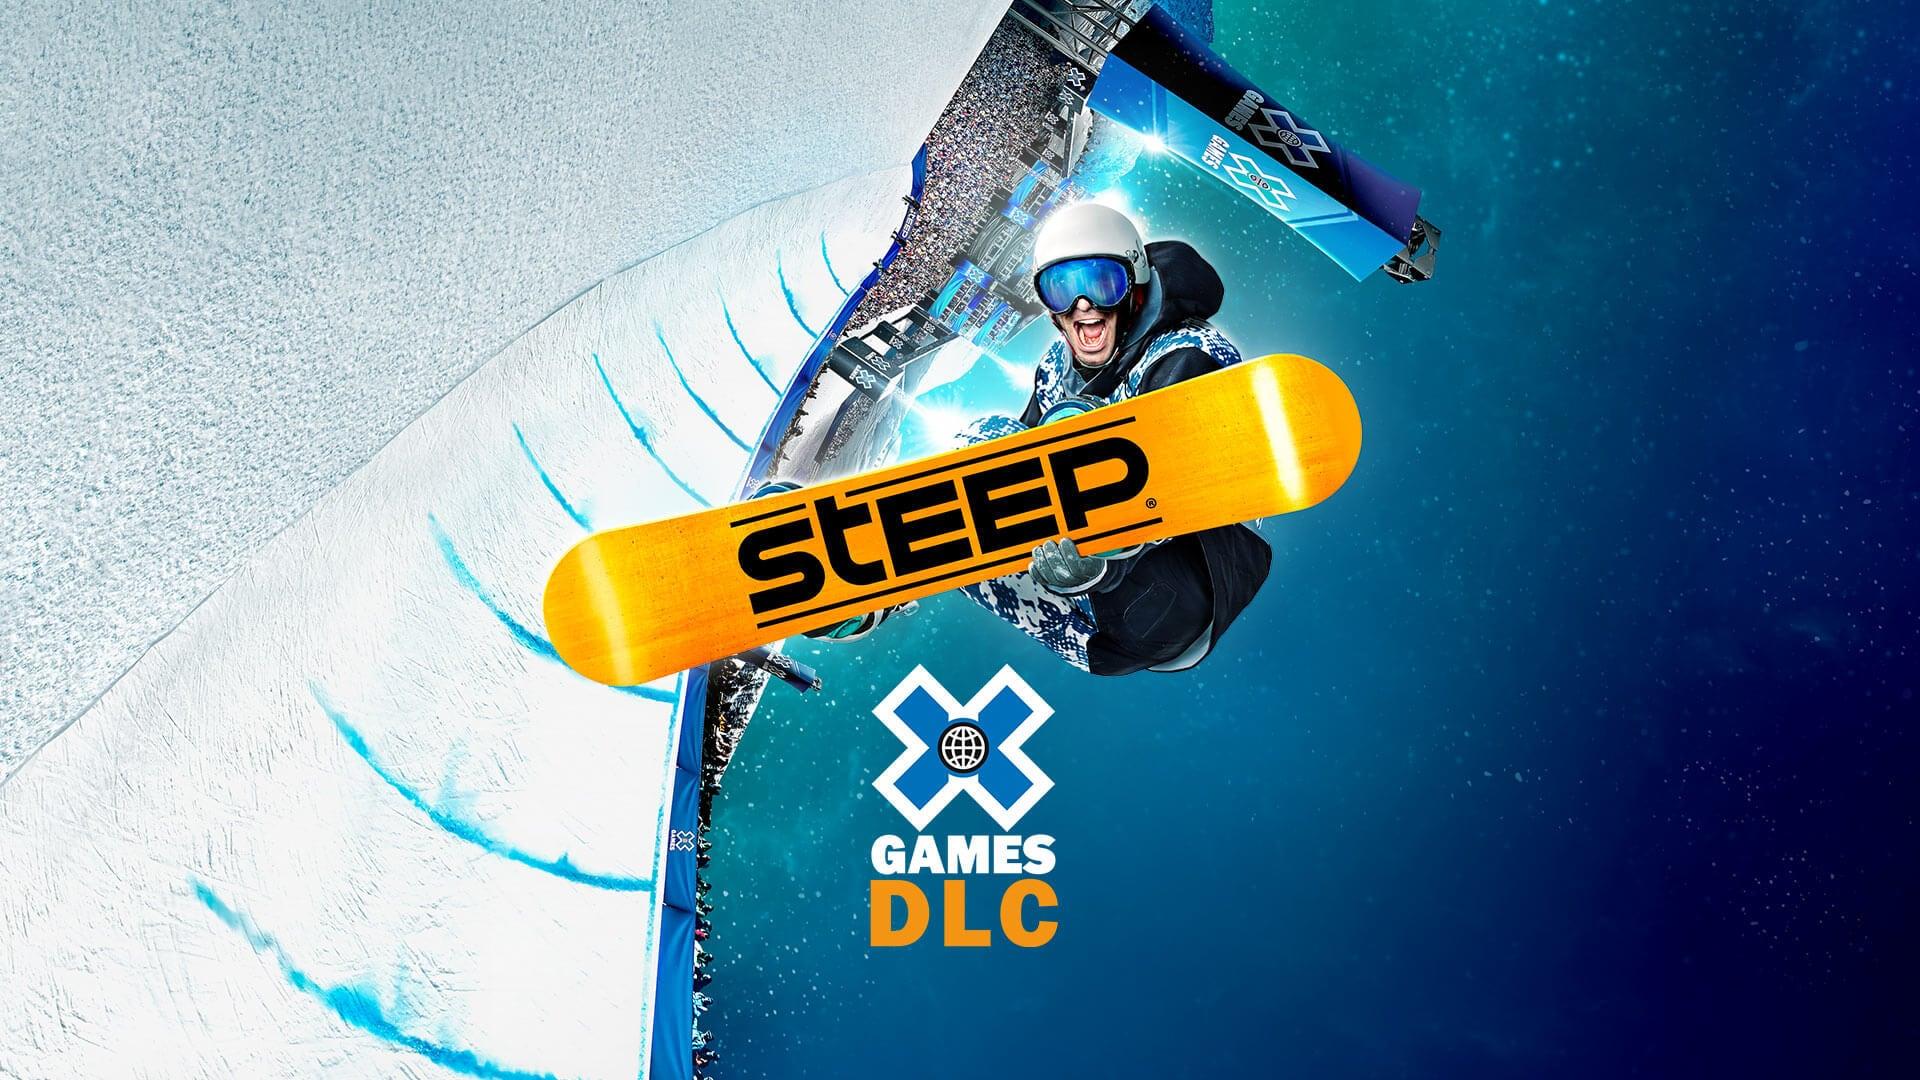 Steep x games Gold Edition ps4. Steep x games Gold Edition 240₽. Steep Cover. Steep - x games Pass (DLC). X games сайт